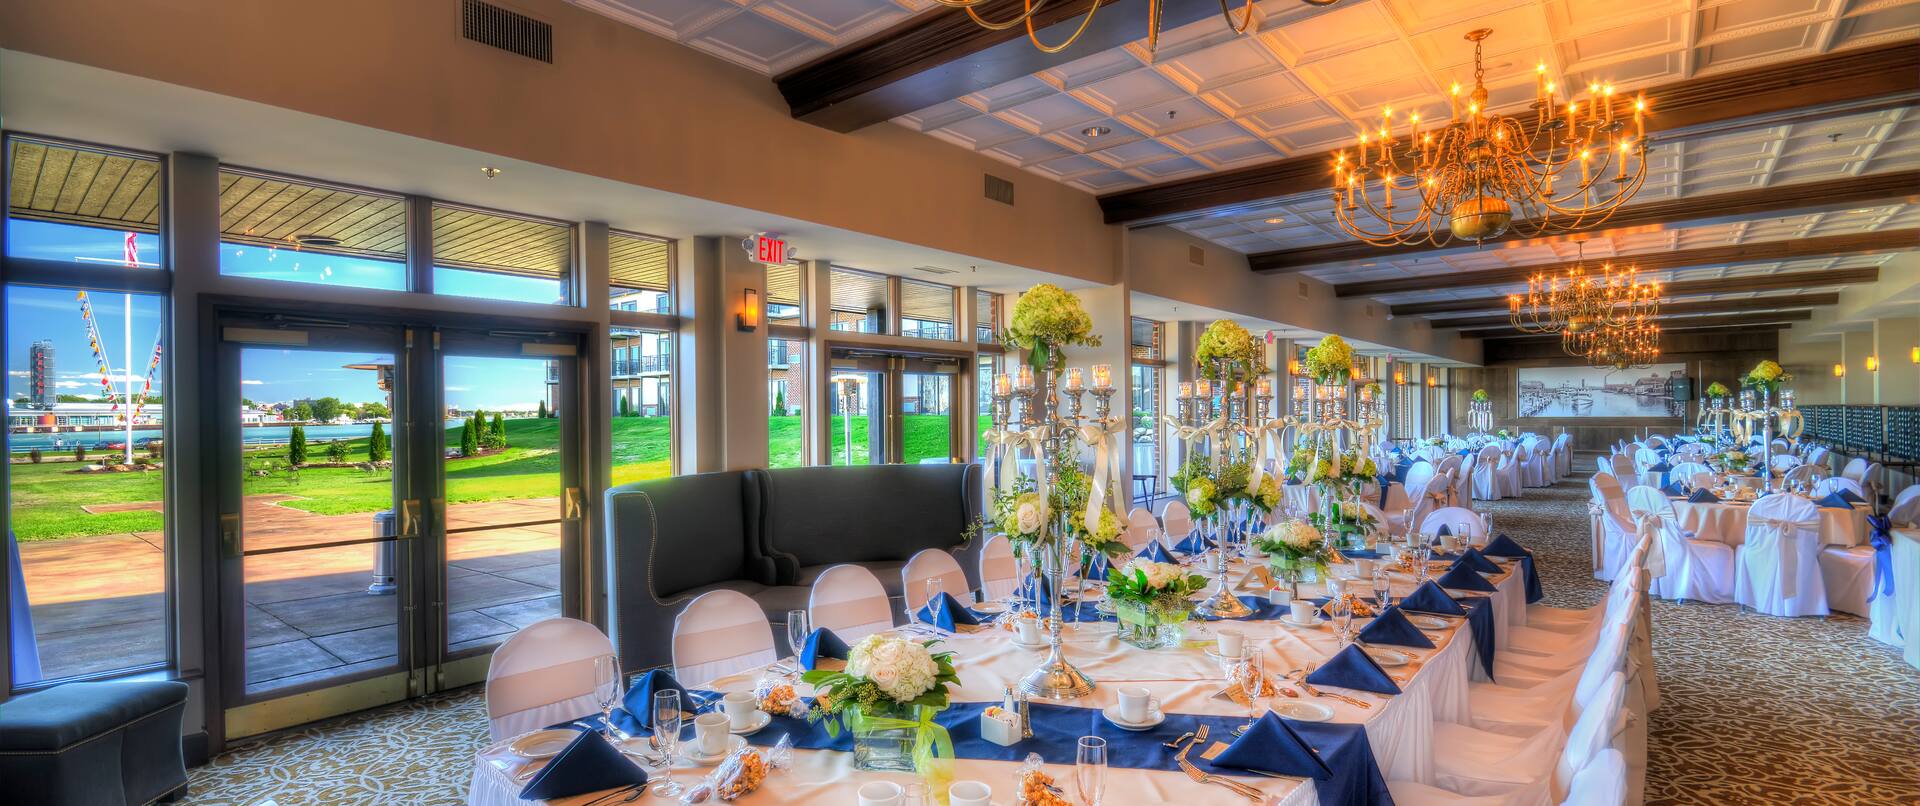 Glass Doors and Windows With Views, Head Table With Place Settings, Flowers, Blue Napkins, and Candles on White Linens, White Chairs, Soft Seating in Banquet Room